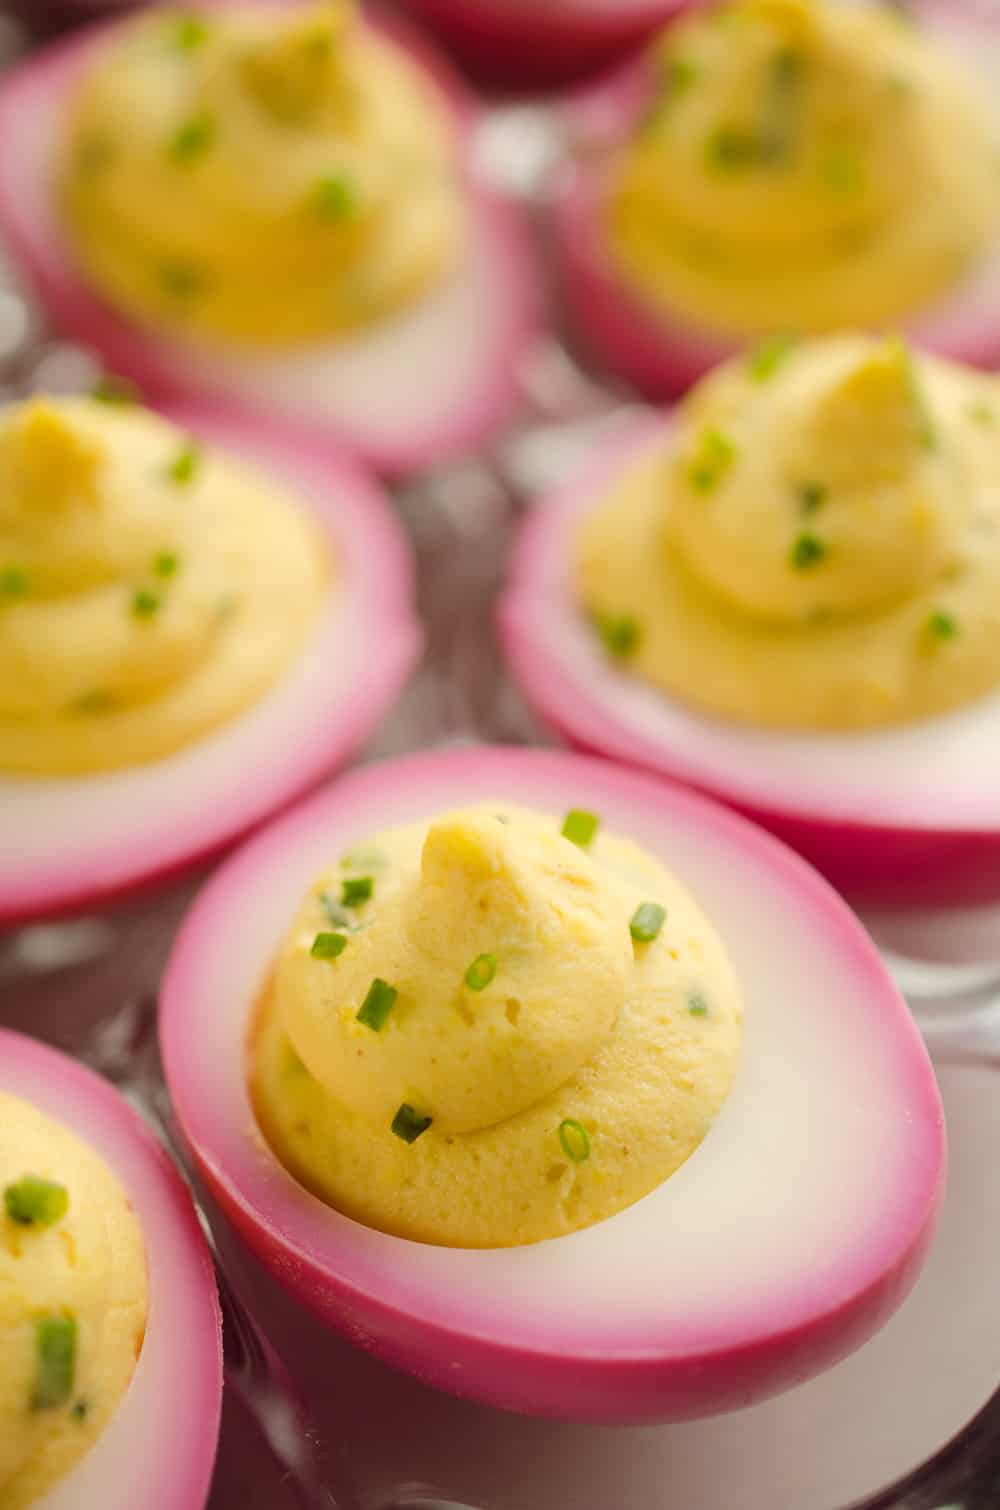 Pink Pickled Deviled Eggs are a beautiful side dish or appetizer perfect for your holiday table. Hard boiled eggs are lightly pickled in beet juice and vinegar for the unique color that is sure to impress your guests!